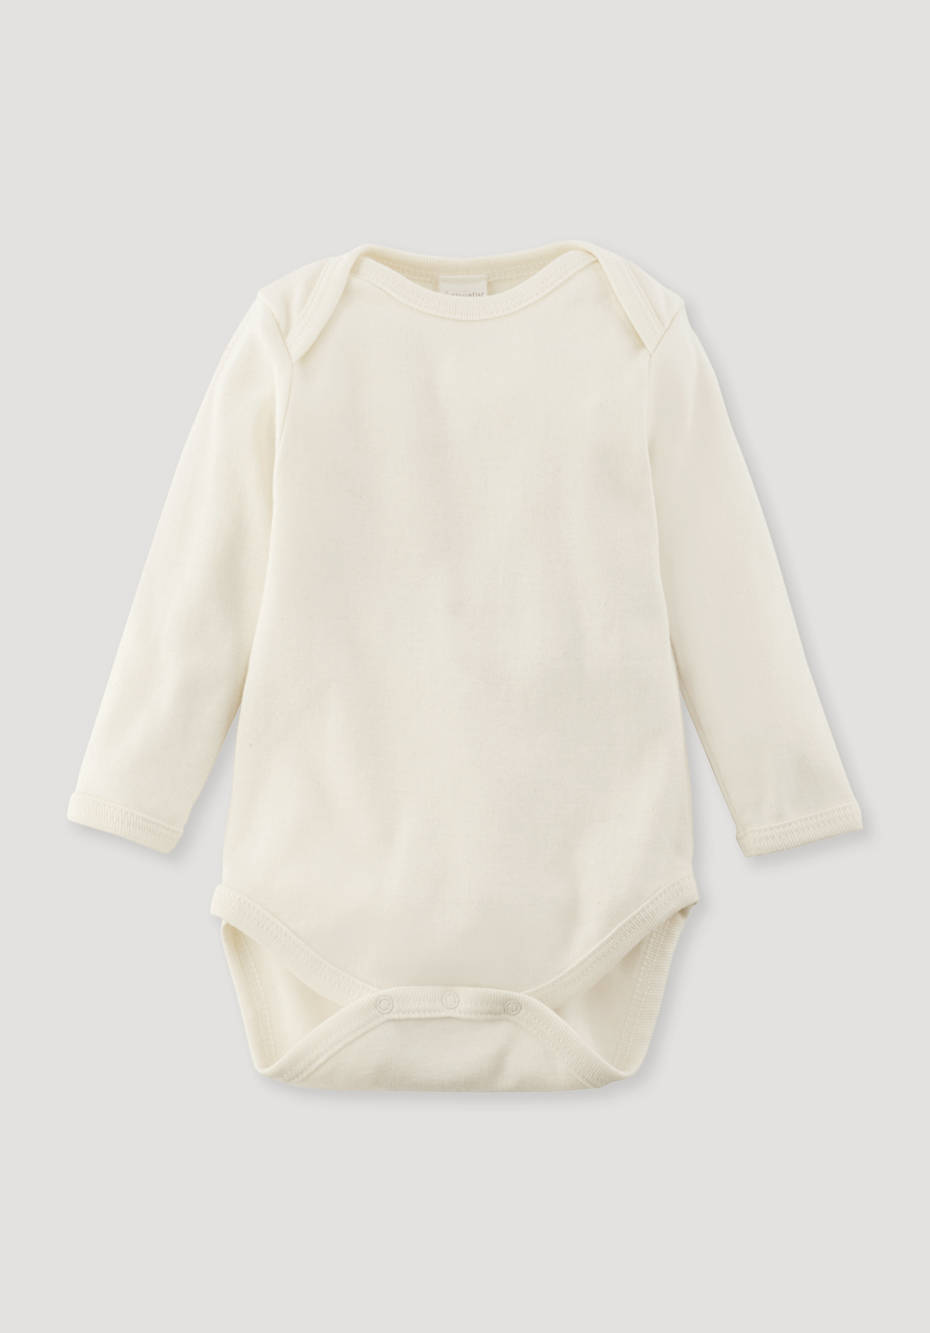 Slim long-sleeved body made of pure organic cotton